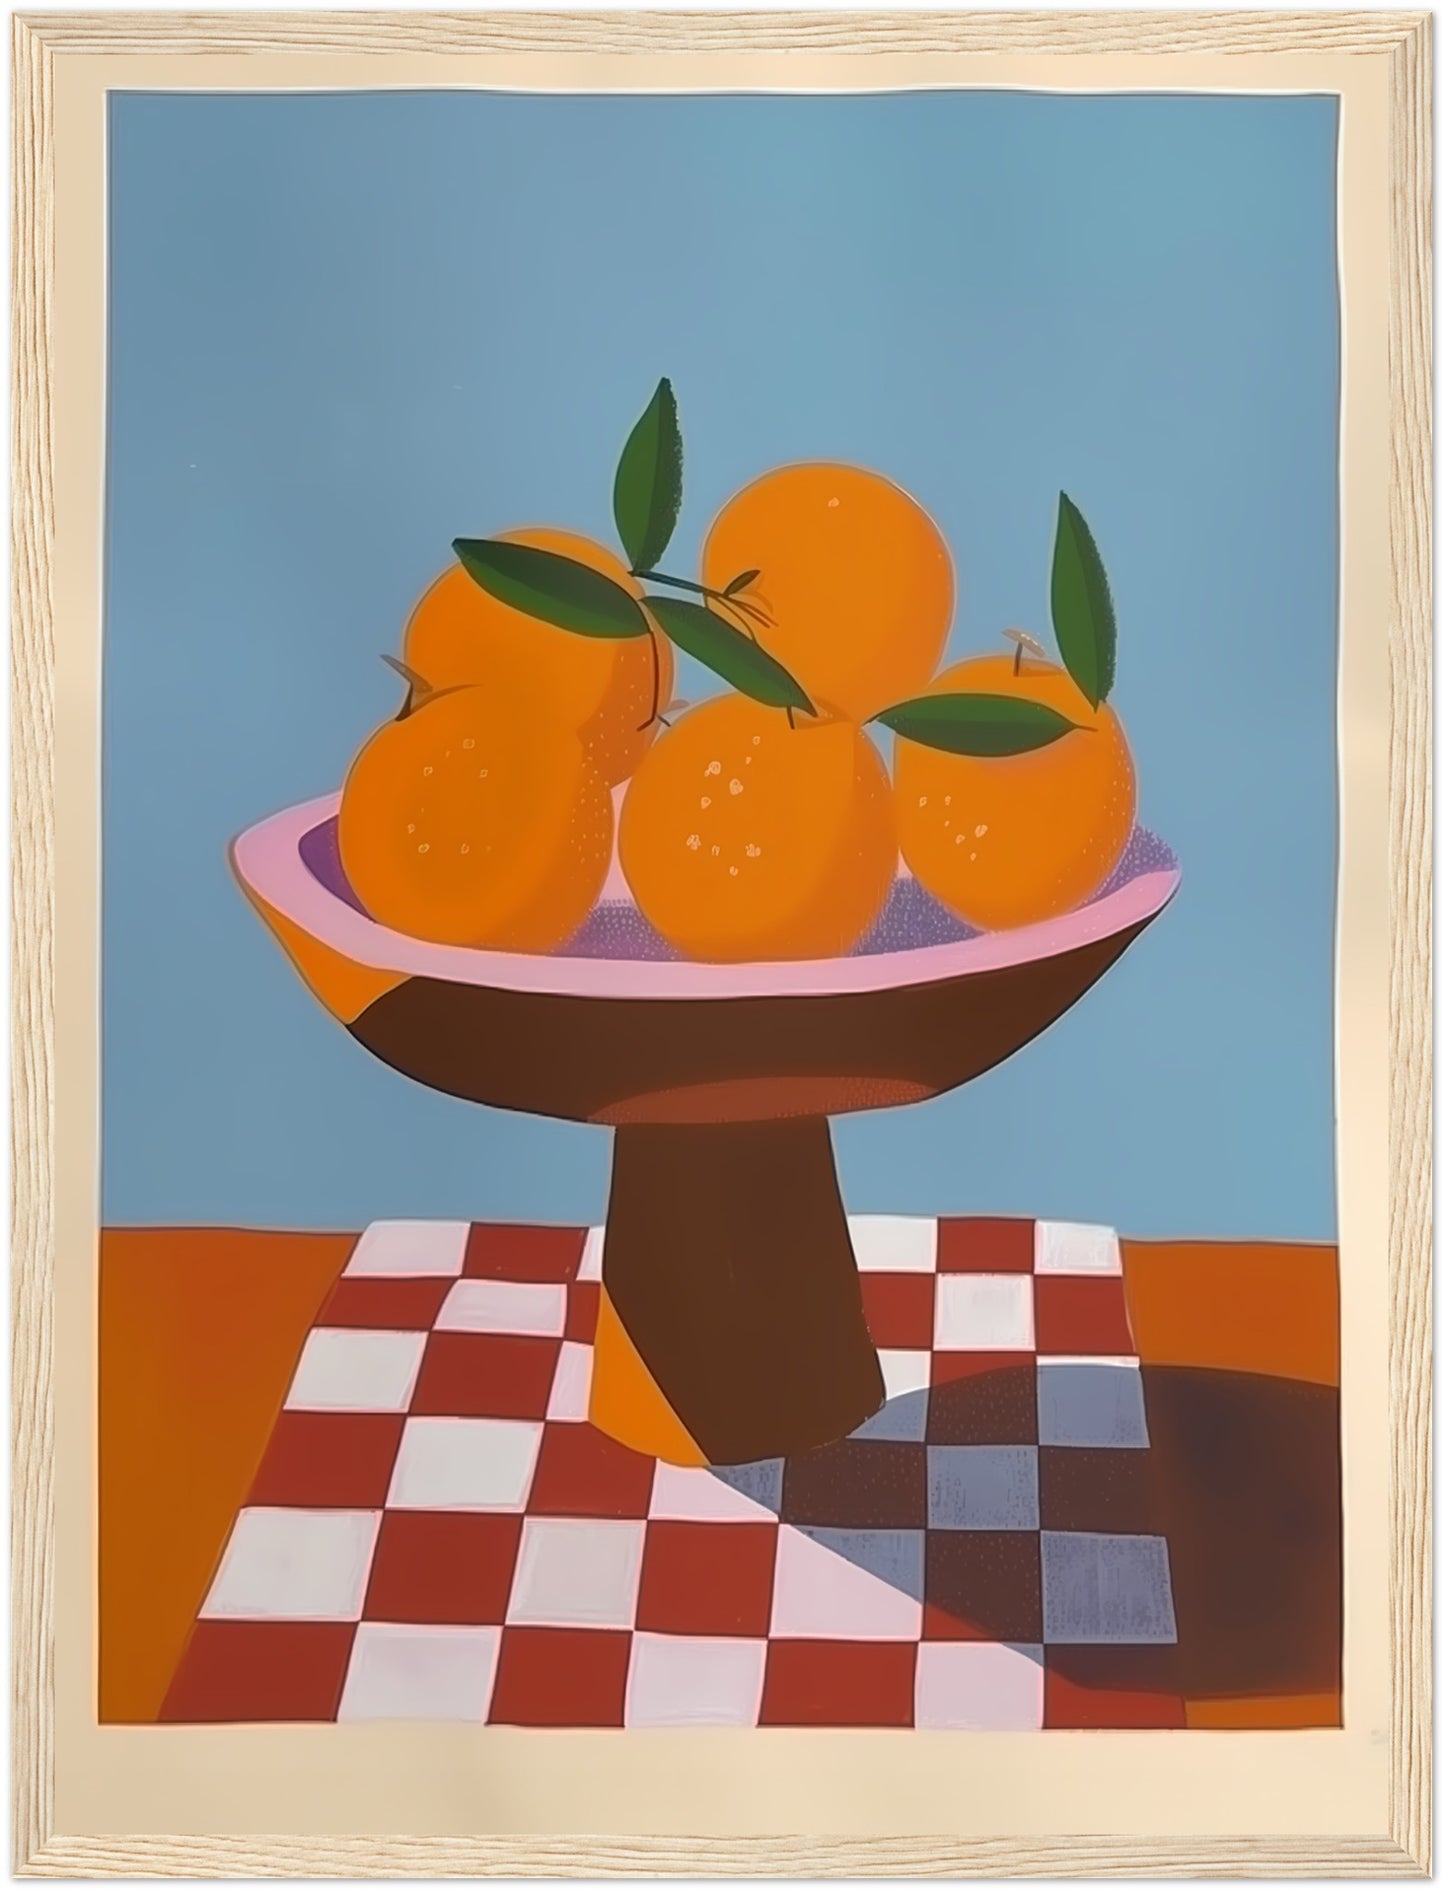 A framed painting of a bowl containing oranges on a checkered surface.